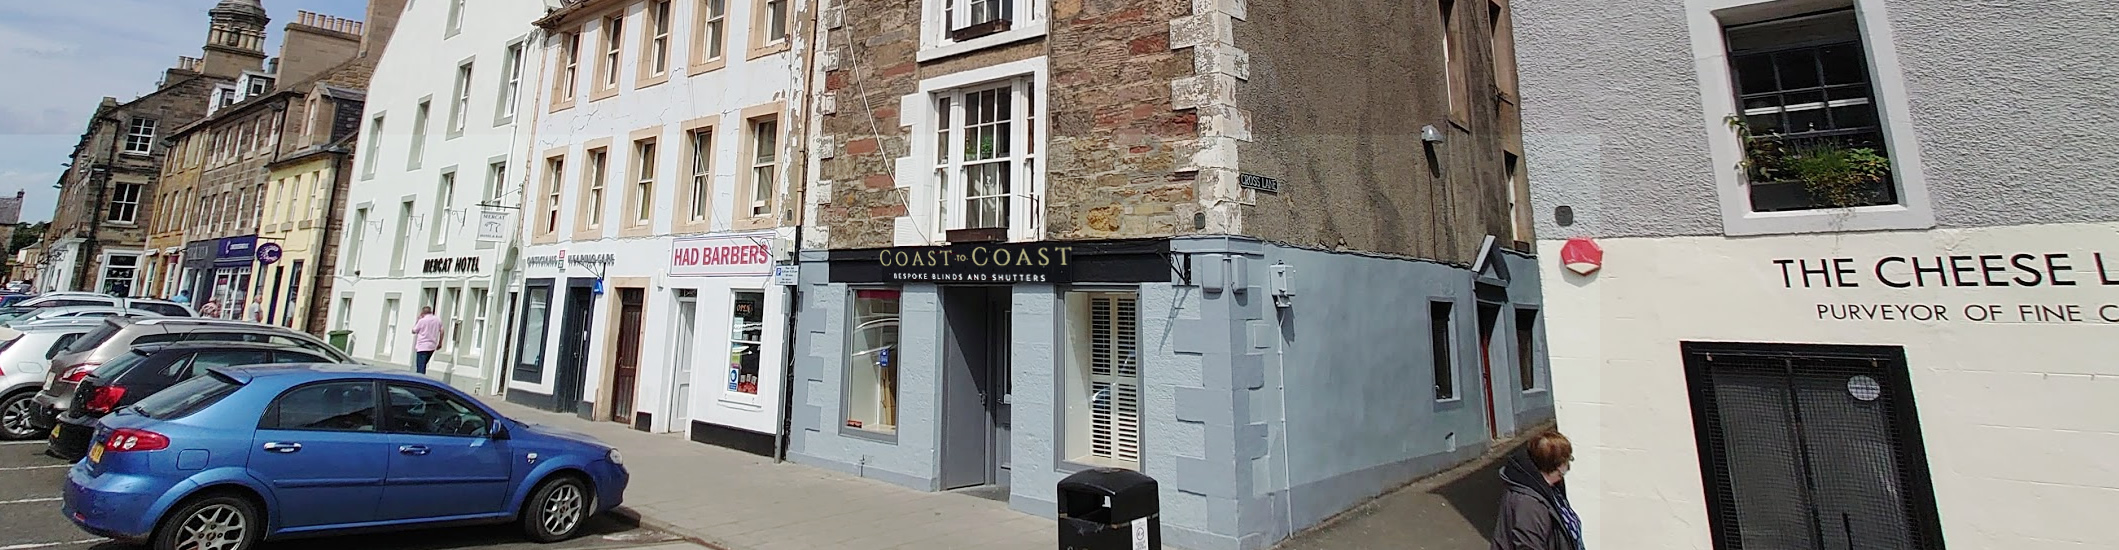 Castle Blinds is now Coast to Coast!